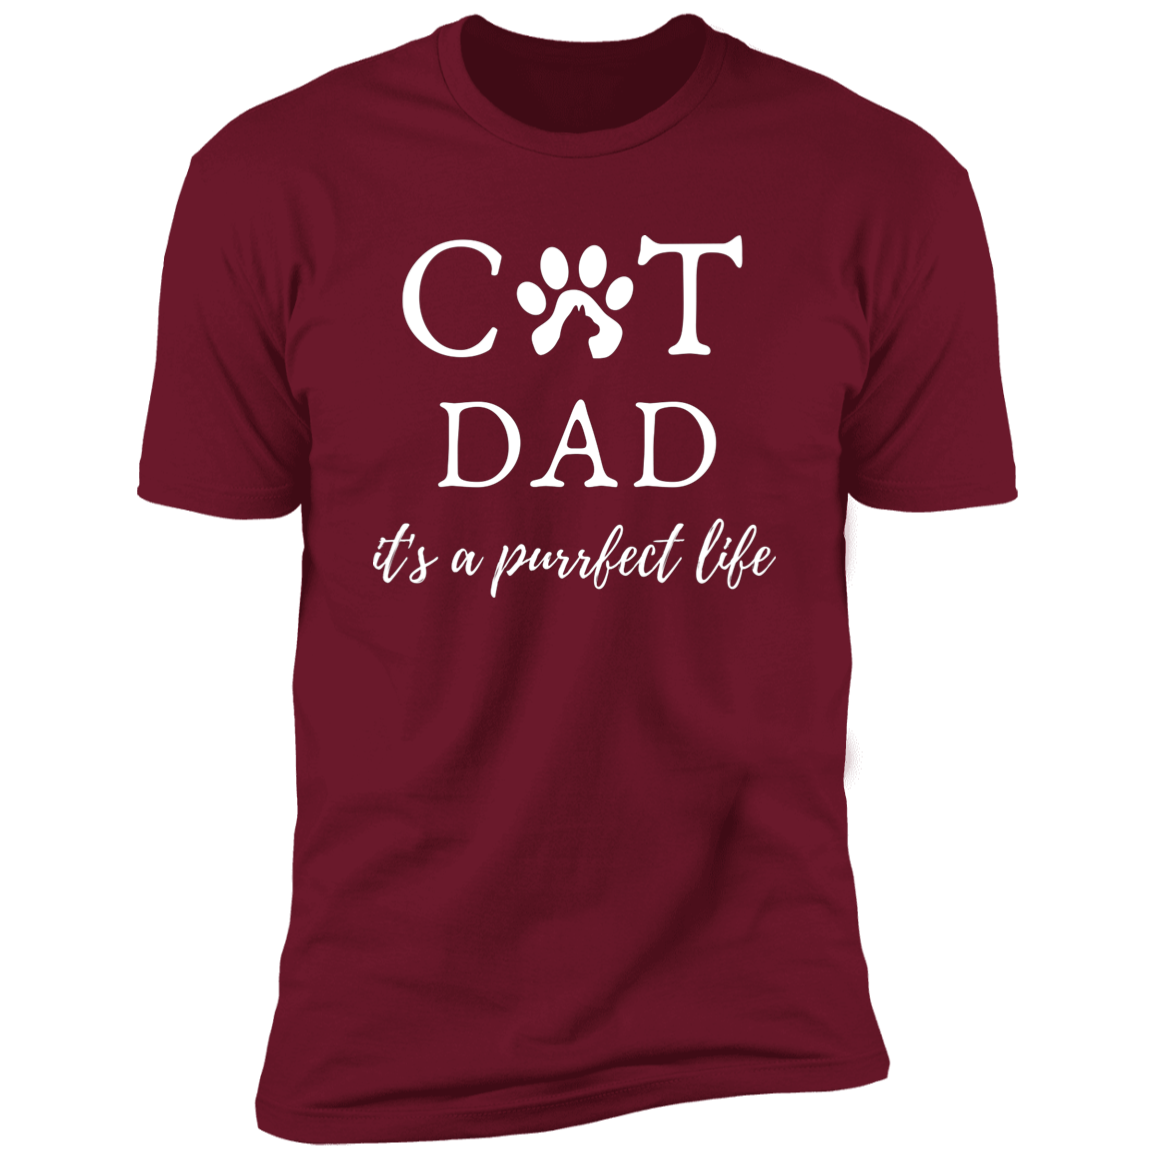 Cat Dad It's a Purrfect Life T-shirt, Cat Dad Shirt for humans, in cardinal red